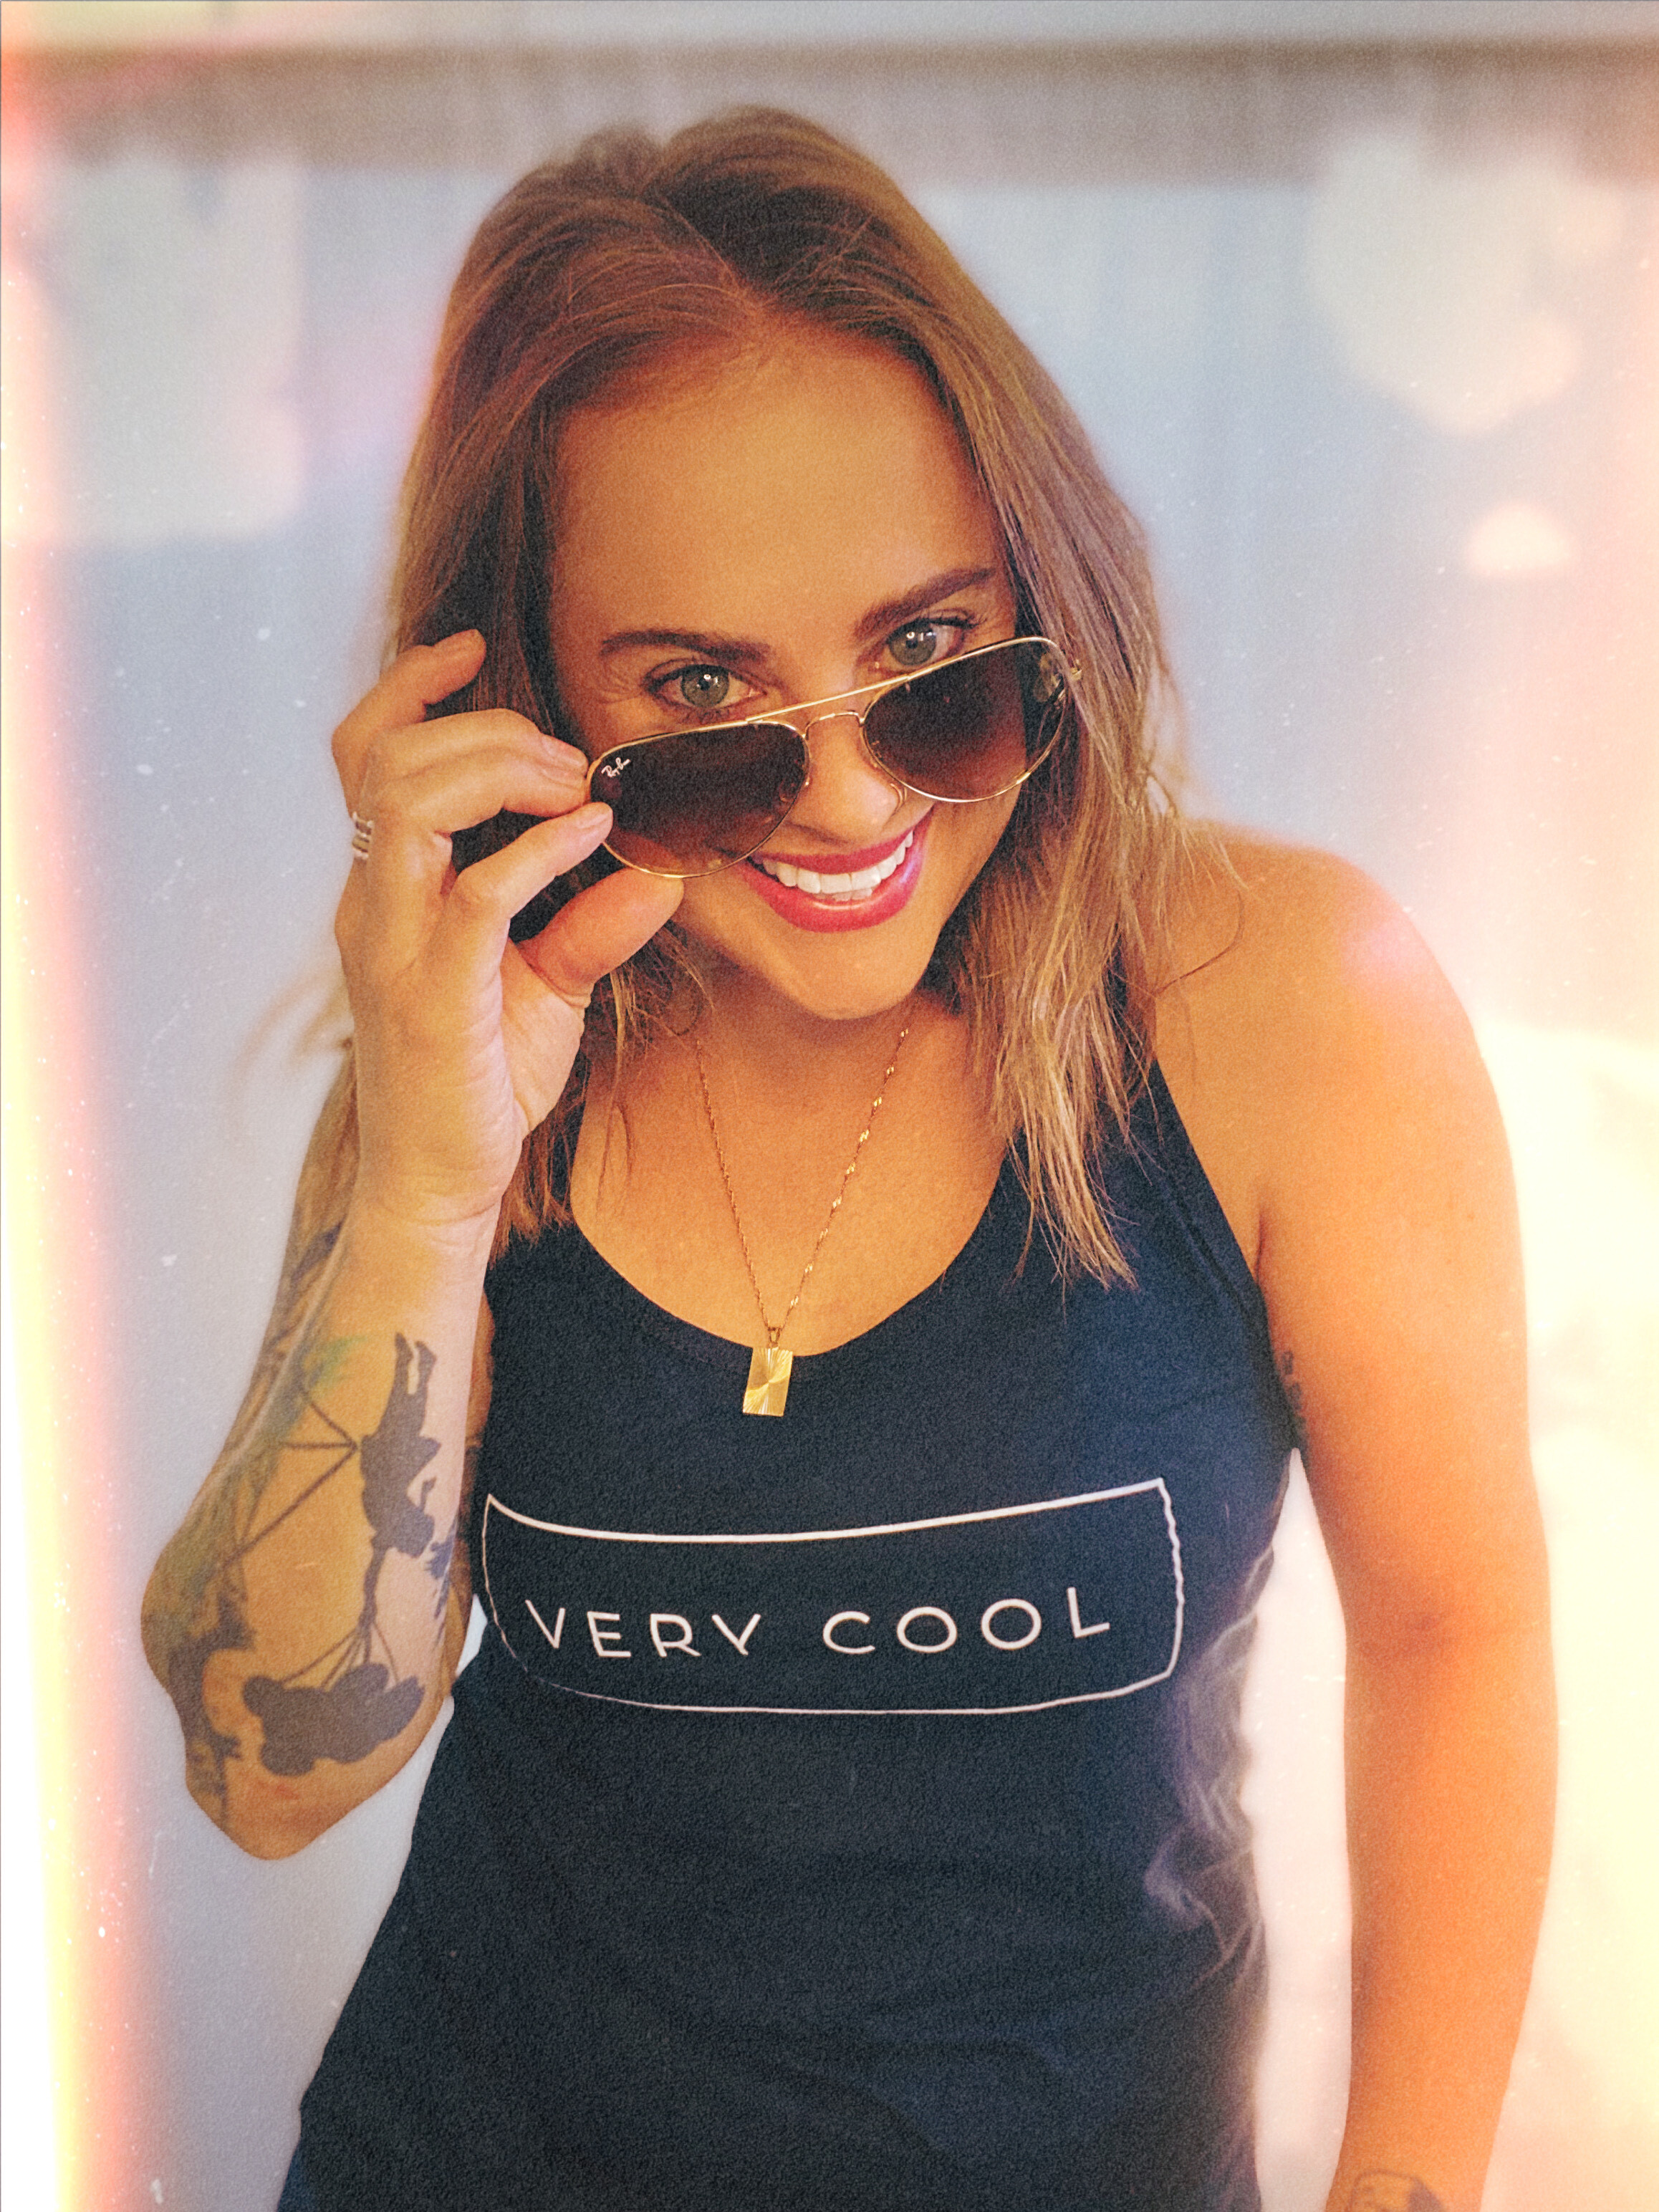 Portrait of Cassandra of Lux + Luca jewelry line, wearing a black tank top that says “very cool” and aviator sunglasses. Cassandra is tilting the sunglasses down and smiling at the camera. 